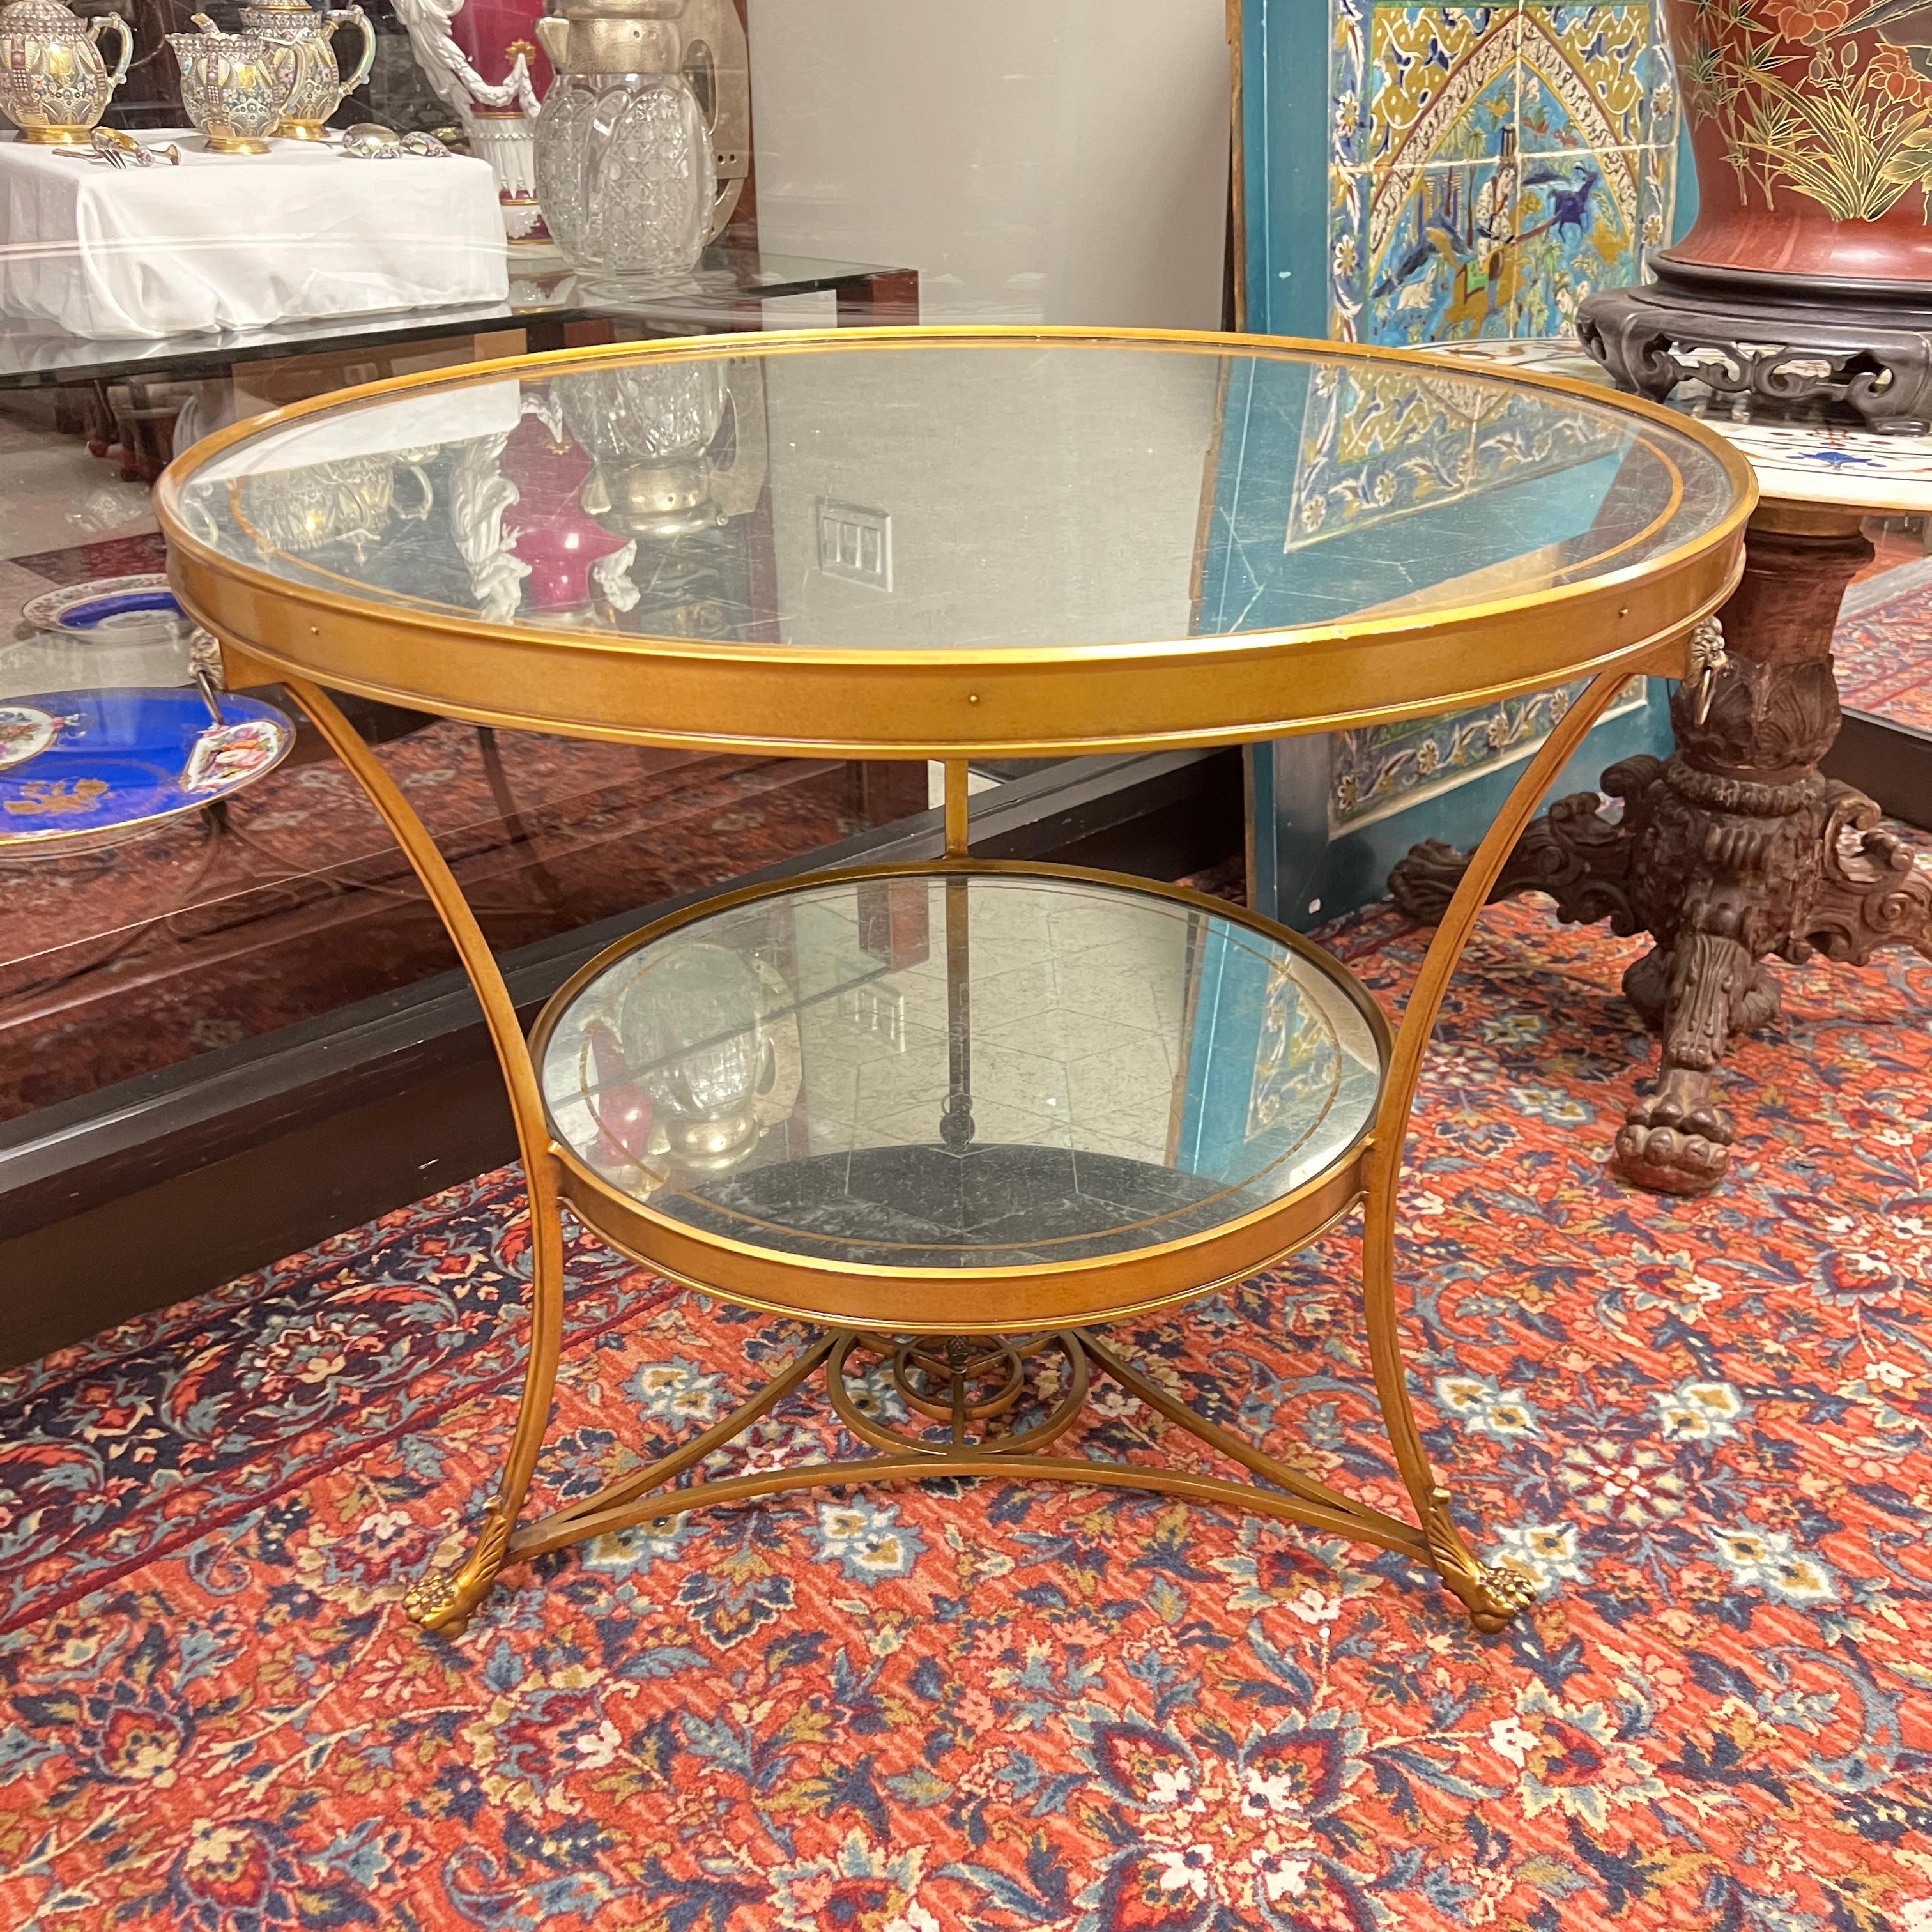 Exceptional vintage bronze tripod center table in the stylized Louis XVI style with geometric engraved mirrored top and stretcher, lion masks with rings, with lion paw feet raised on hidden brass casters.  